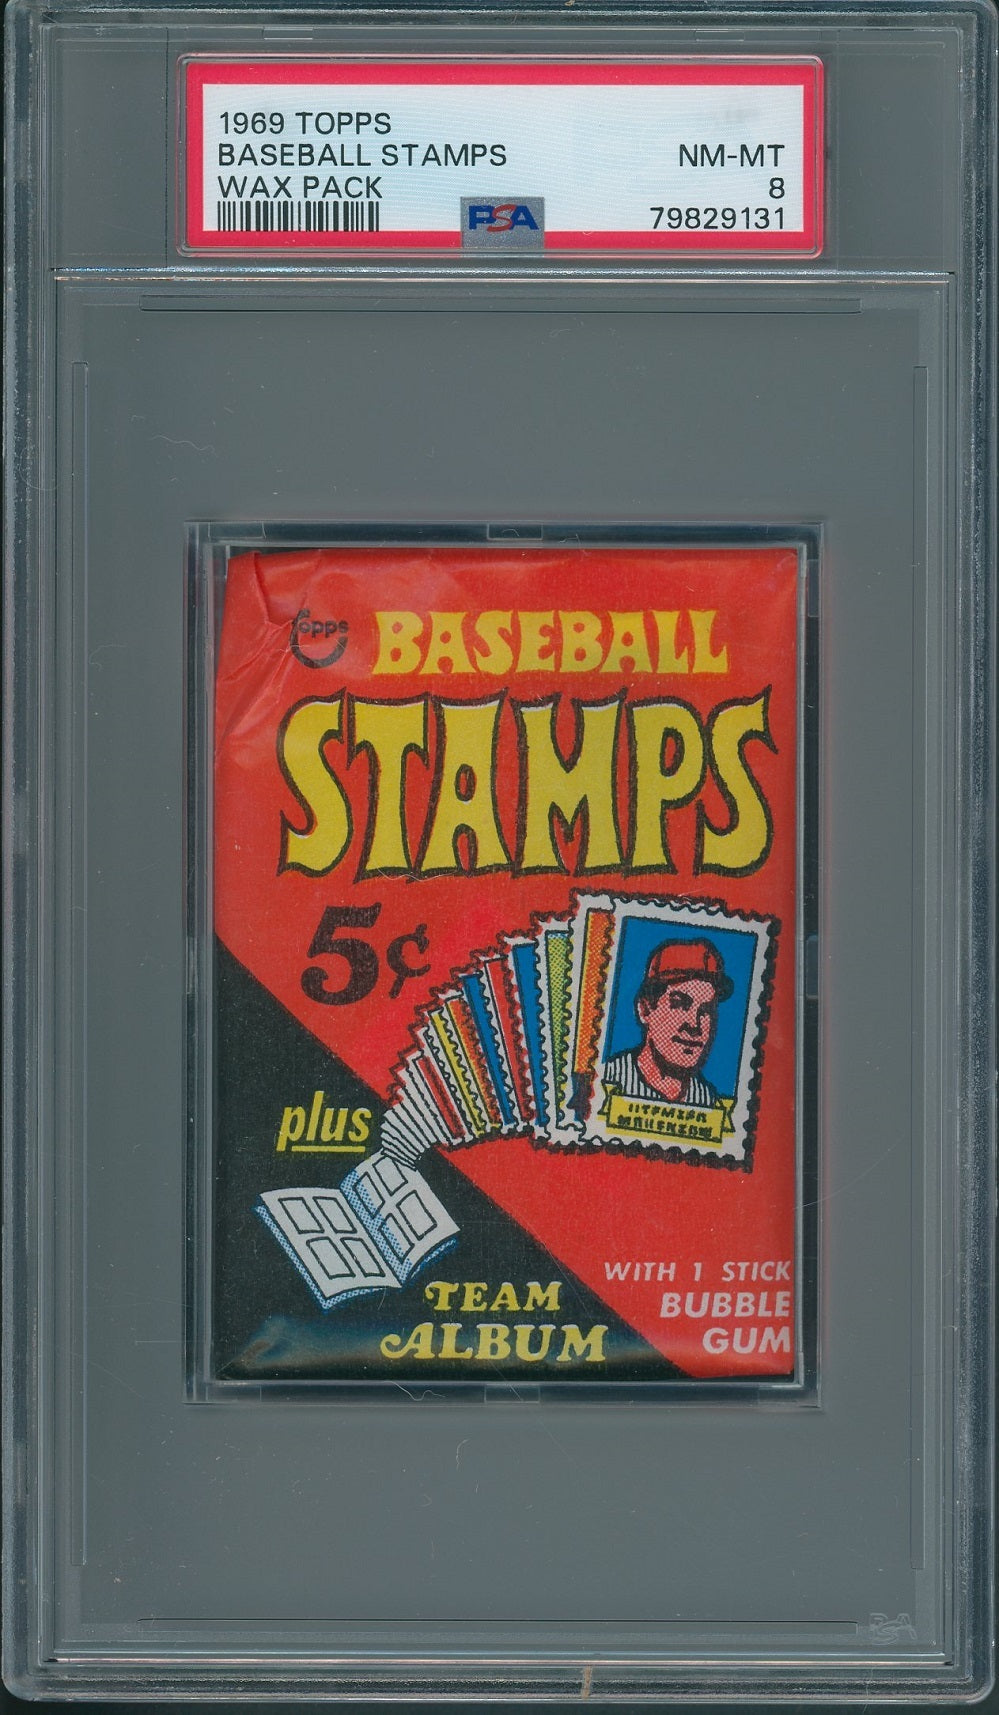 1969 Topps Baseball Stamps Unopened Wax Pack PSA 8 *9131